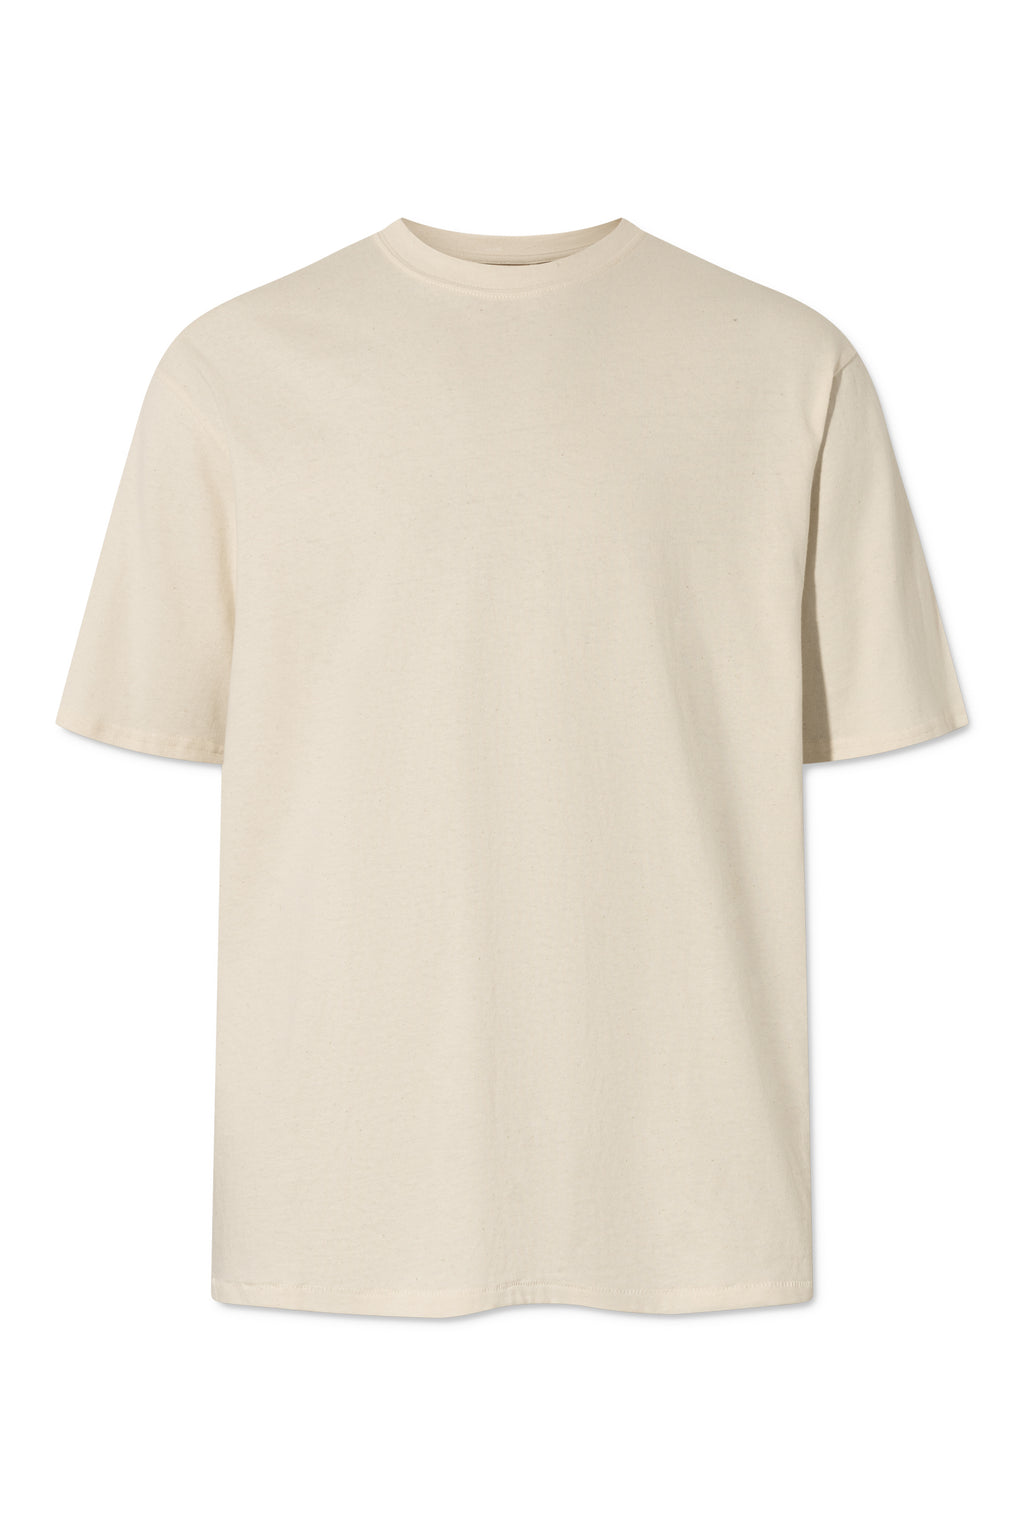 35,723 Beige T Shirt Royalty-Free Images, Stock Photos & Pictures